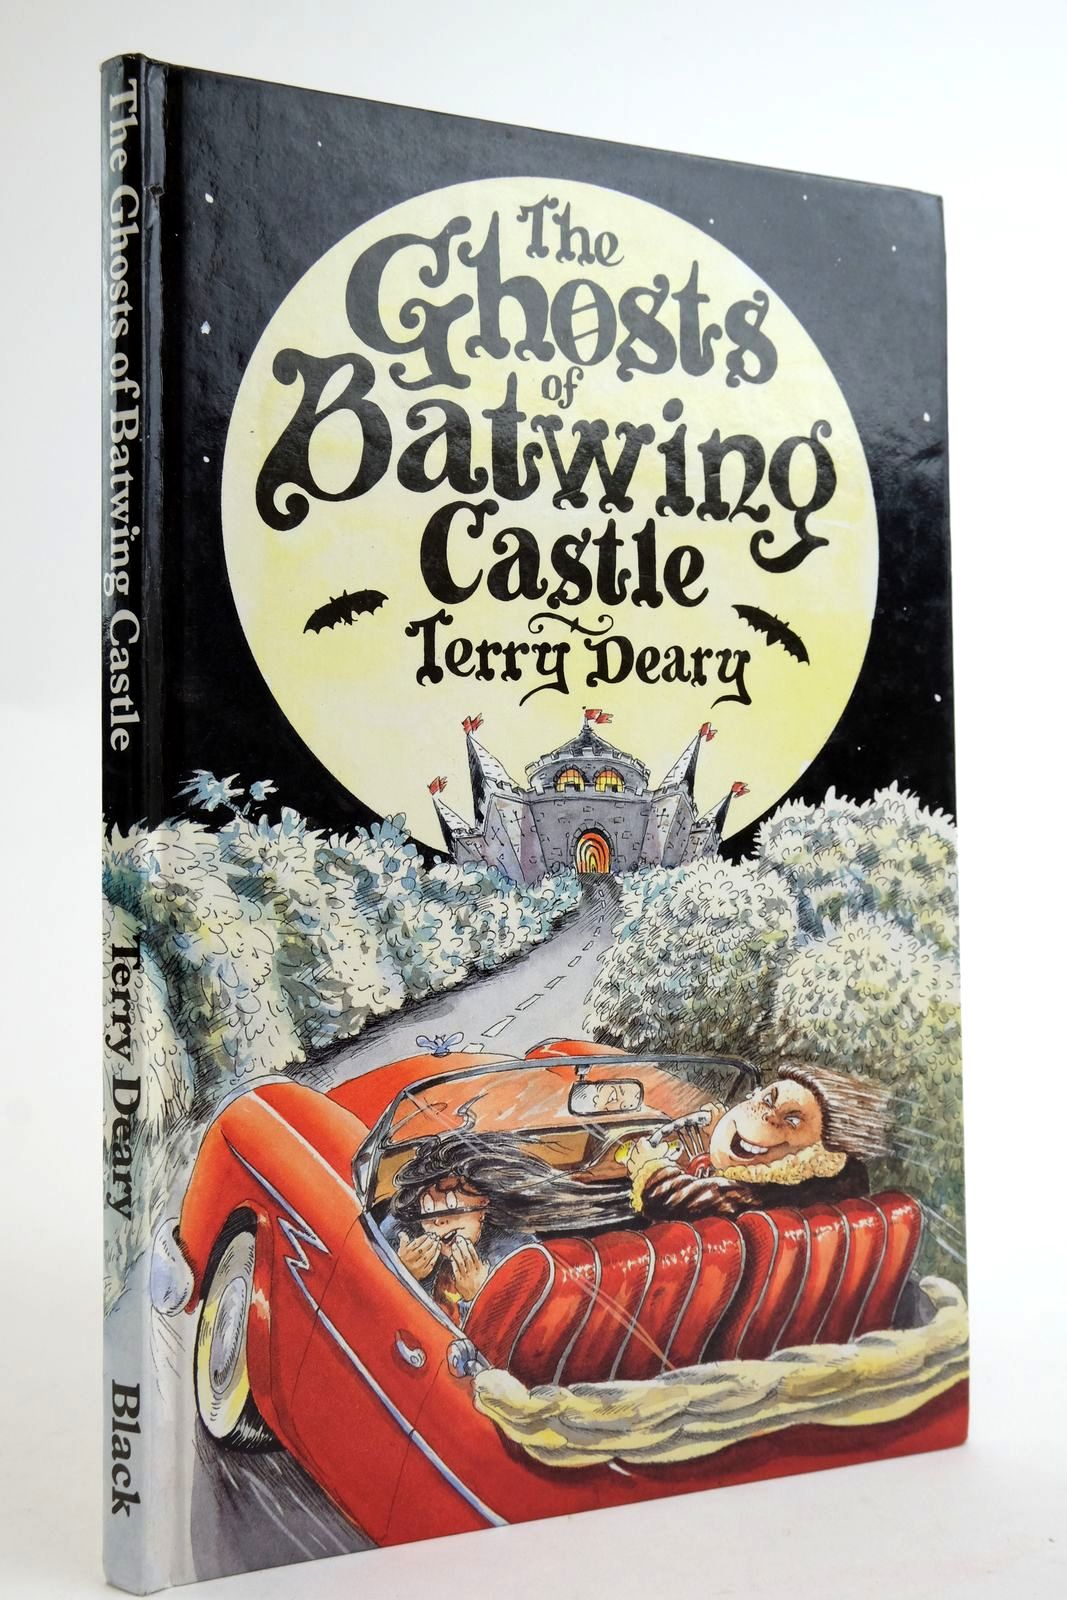 Photo of THE GHOSTS OF BATWING CASTLE written by Deary, Terry illustrated by Rayner, Shoo published by A & C Black Publishers (STOCK CODE: 2135451)  for sale by Stella & Rose's Books